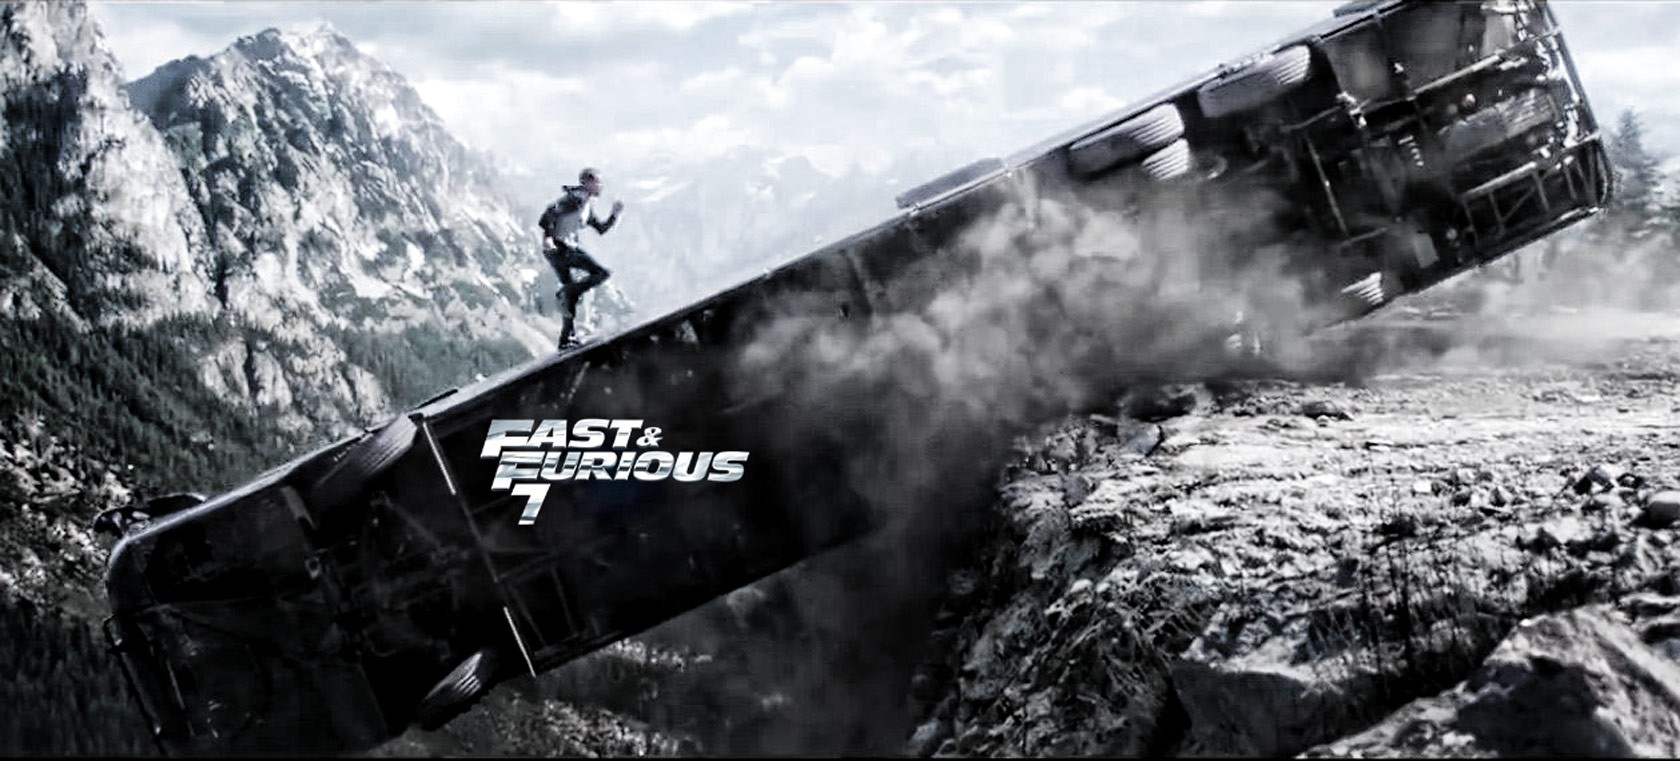 Fast And Furious Movie Action Trailer HD Wallpaper Stylish